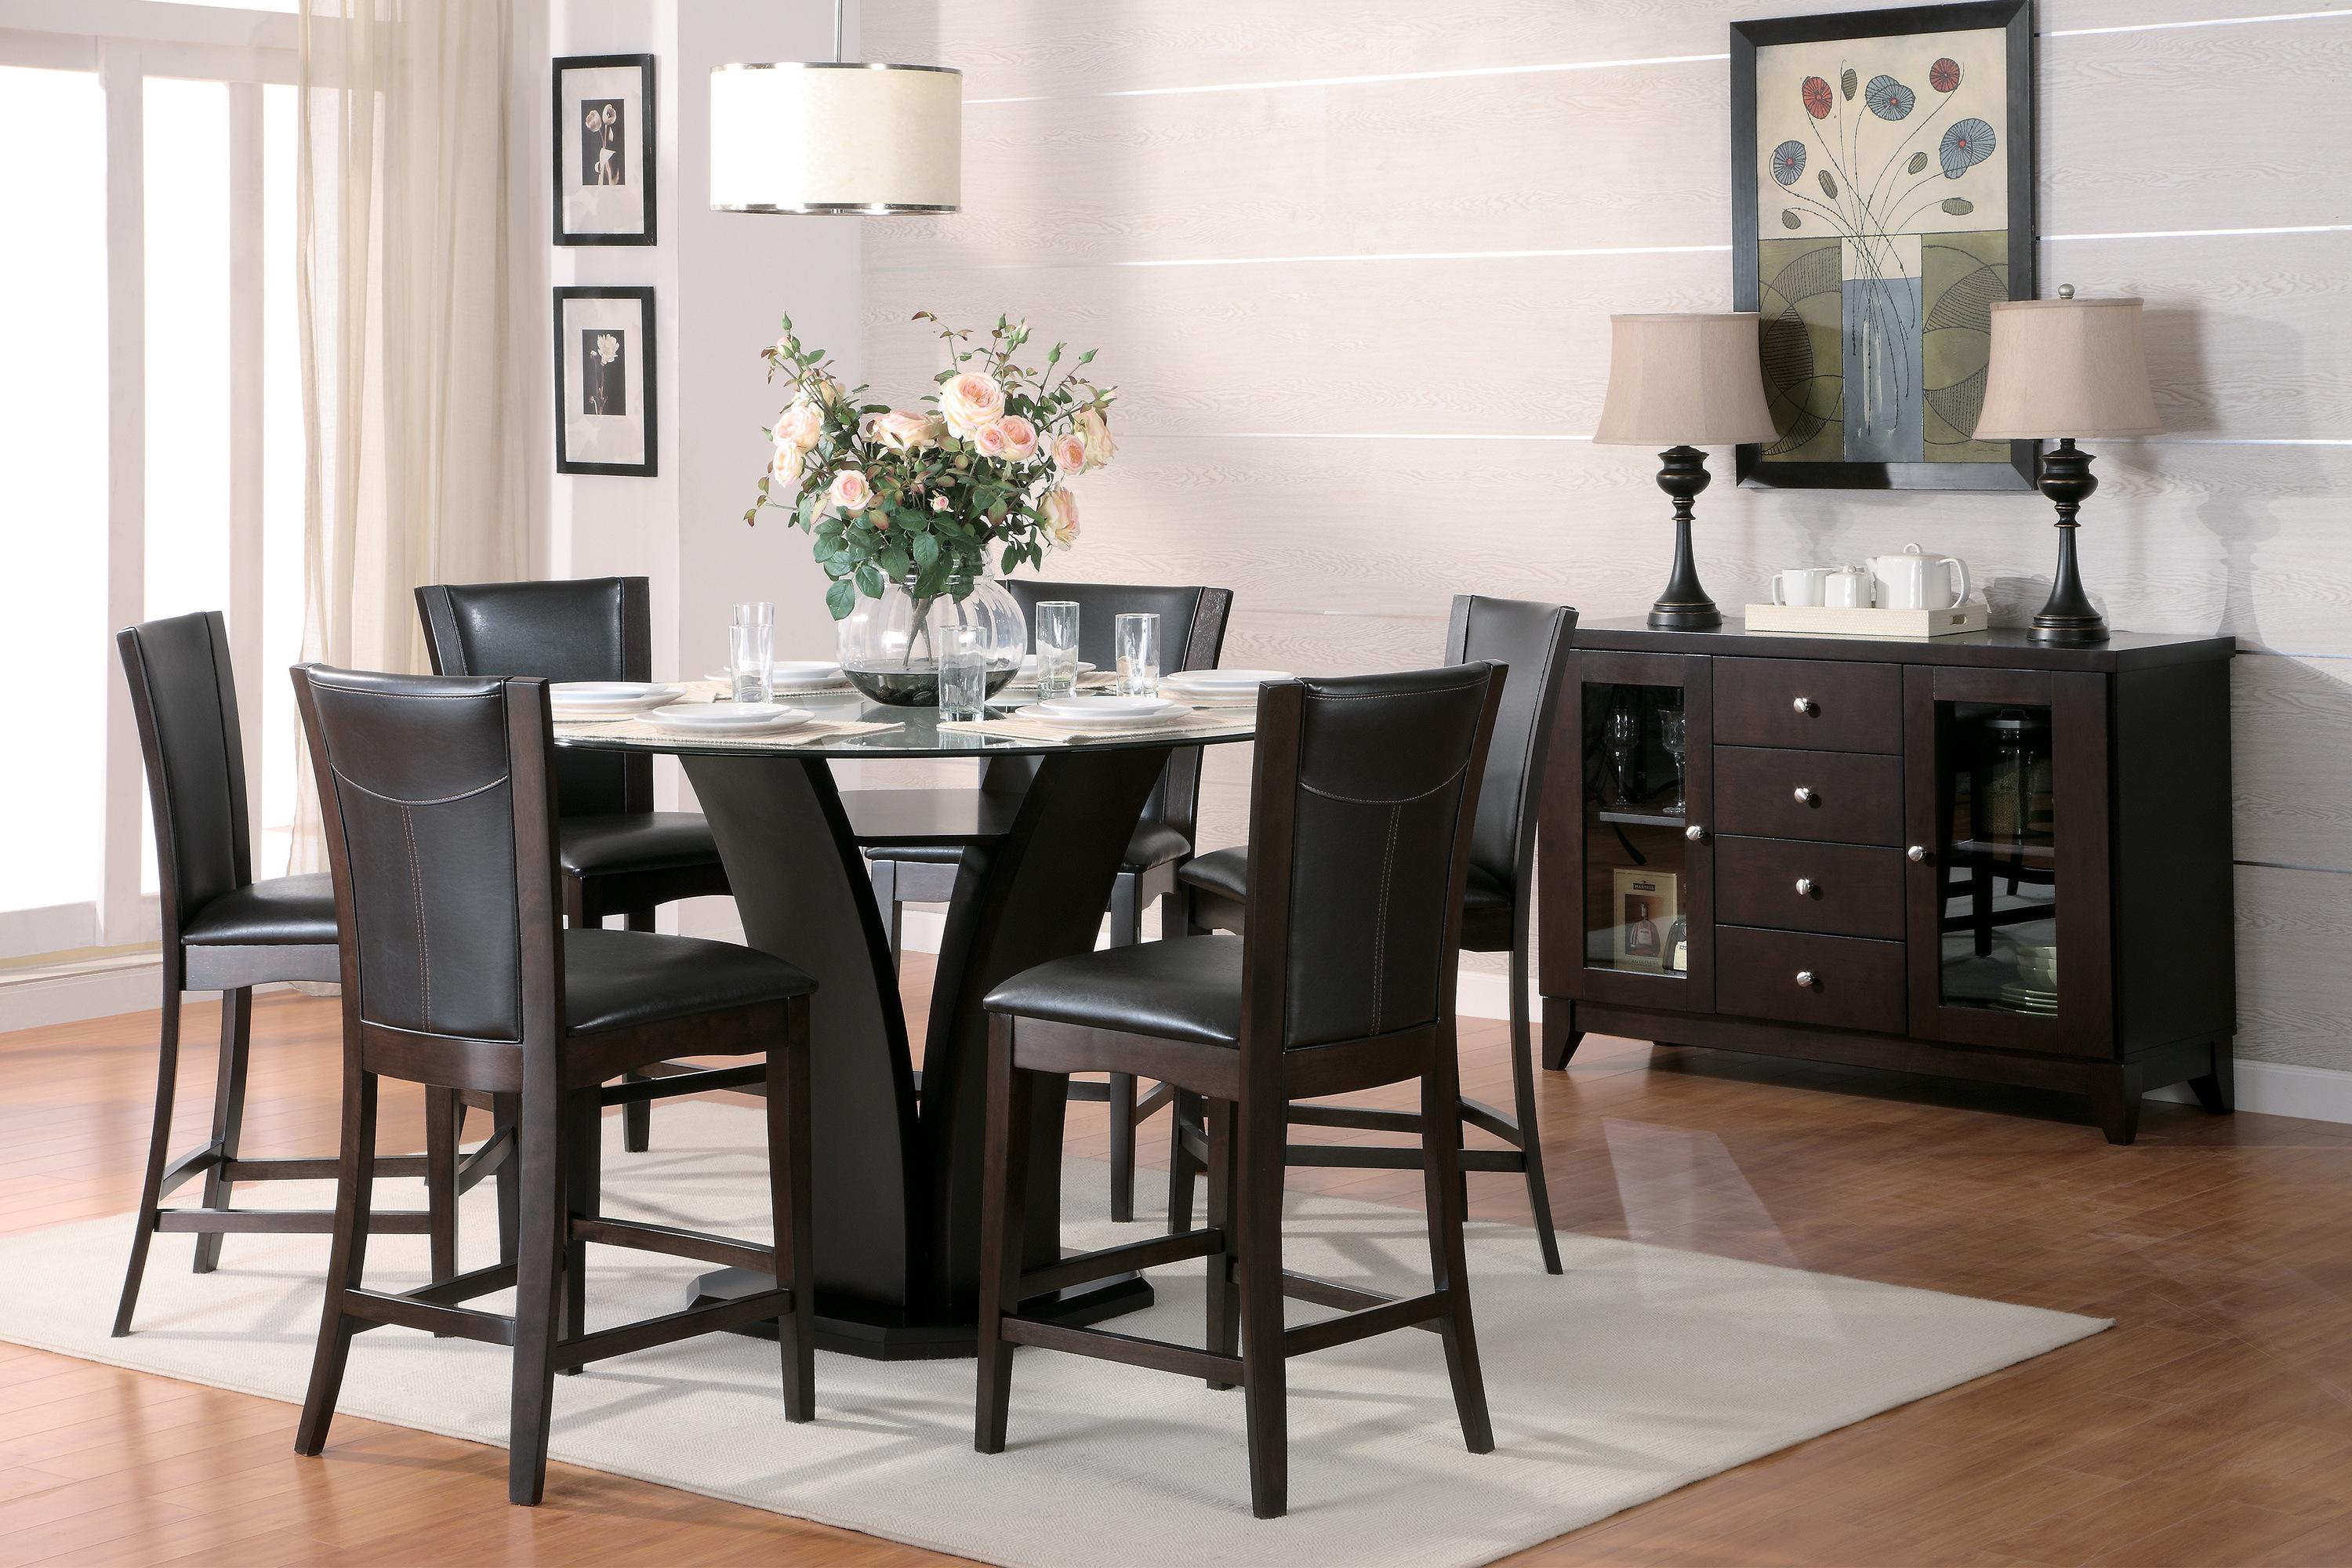 Contemporary Dining Room Set 710-36RD-8PC Daisy 710-36RD-8PC in Espresso, Brown Faux Leather